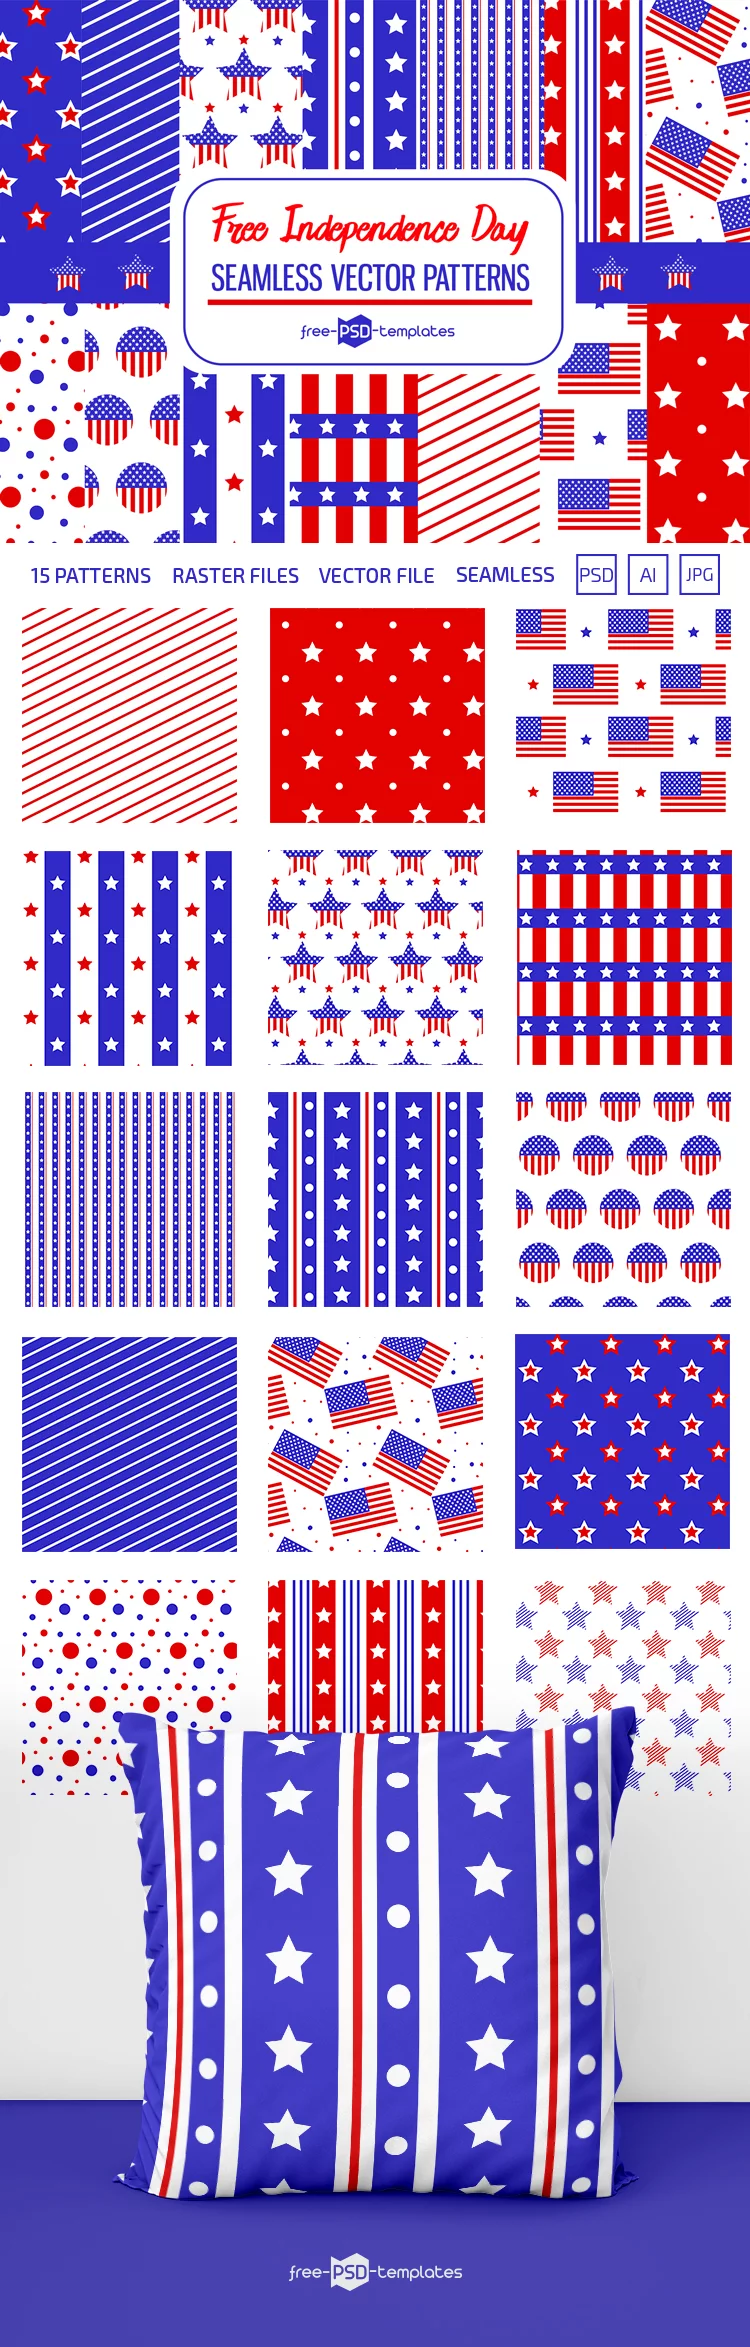 Free Vector Independence Day Patterns Set